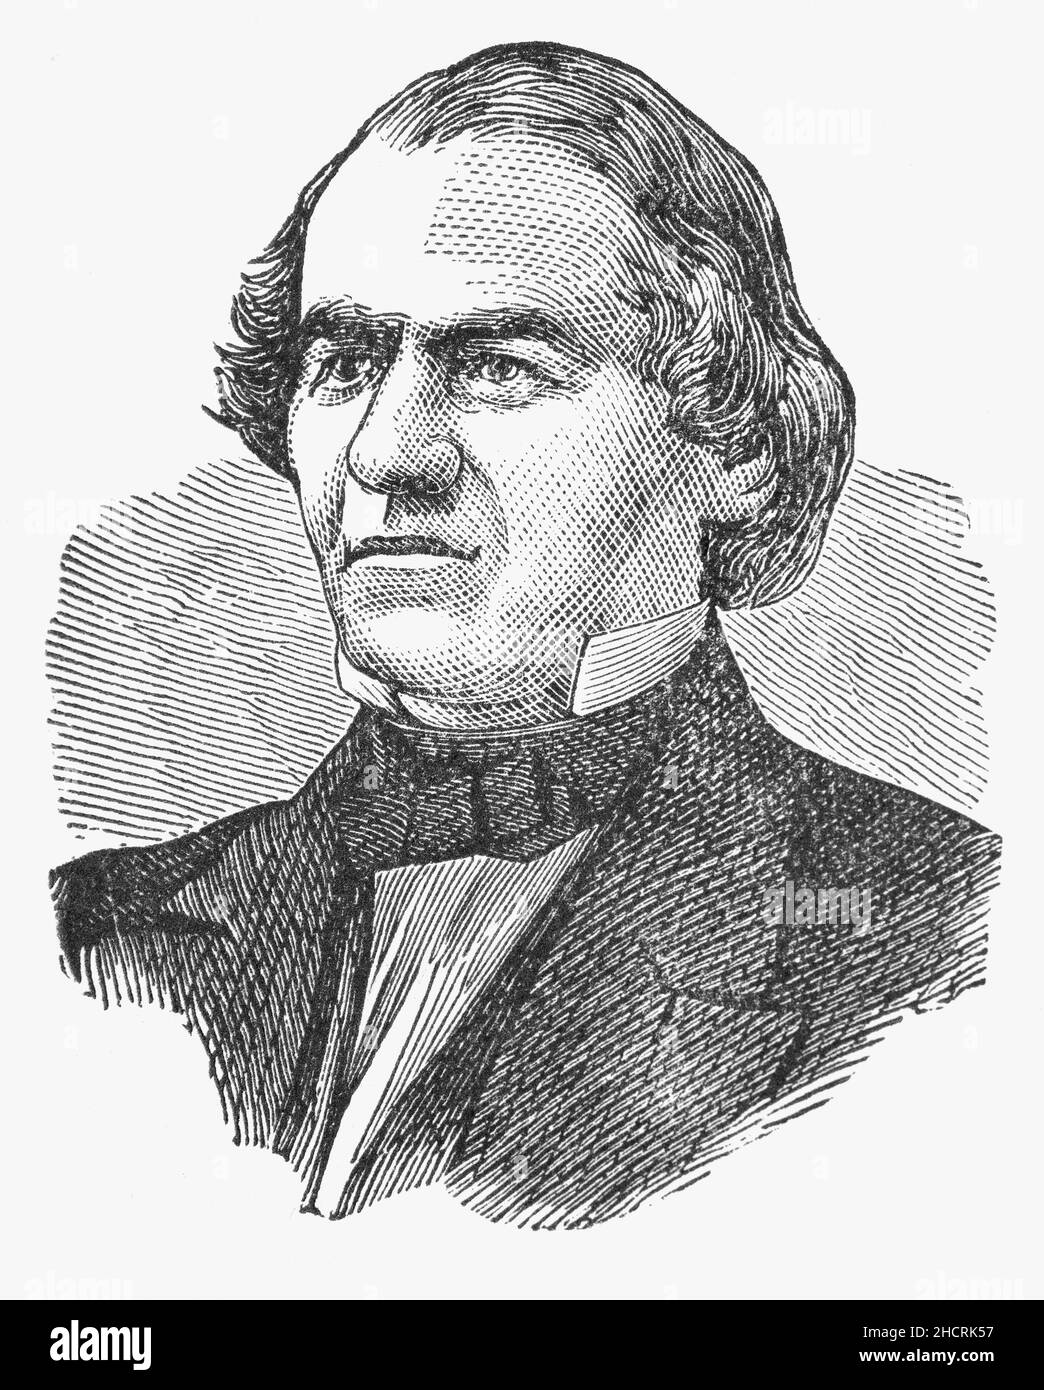 A late 19th Century portrait of Andrew Johnson (1808-1875) was the 17th president of the United States, serving from 1865 to 1869. He assumed the presidency as vice president at the time of Abraham Lincoln's assassination. Johnson was a Democrat who ran with Lincoln, coming to office as the Civil War concluded. He favored quick restoration of the seceded states to the Union without protection for the former slaves. This led to conflict with the Republican-dominated Congress, culminating in his impeachment by the House of Representatives in 1868. He was acquitted in the Senate by one vote. Stock Photo